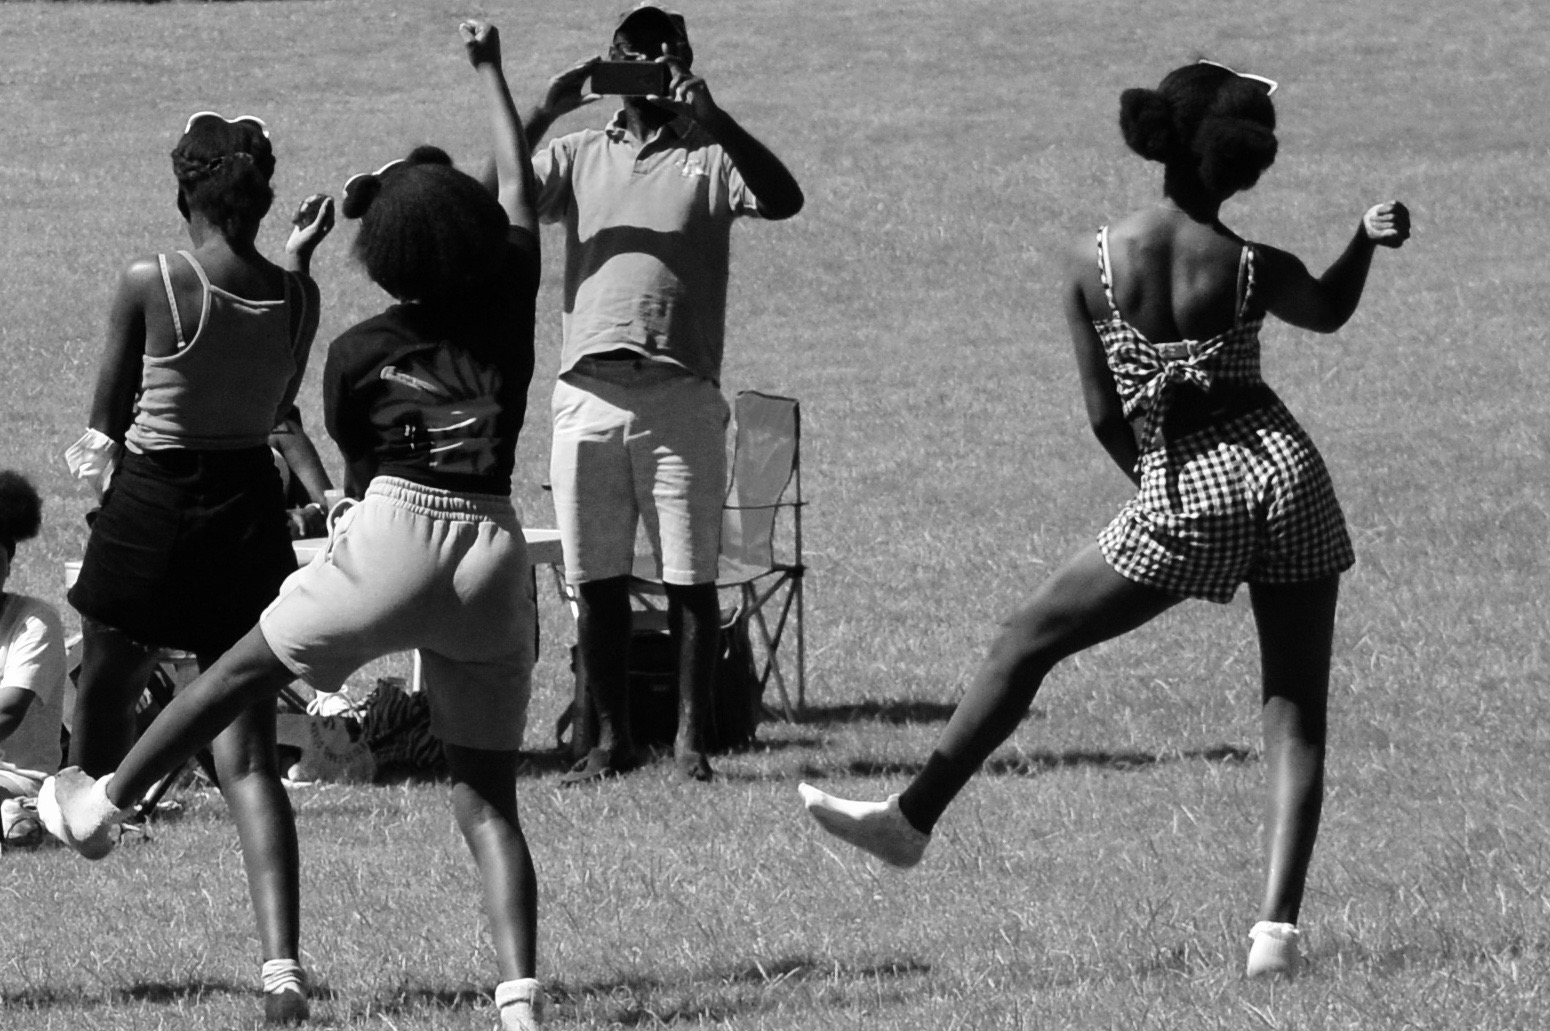 Young girls dancing in the park with their backs to the camera